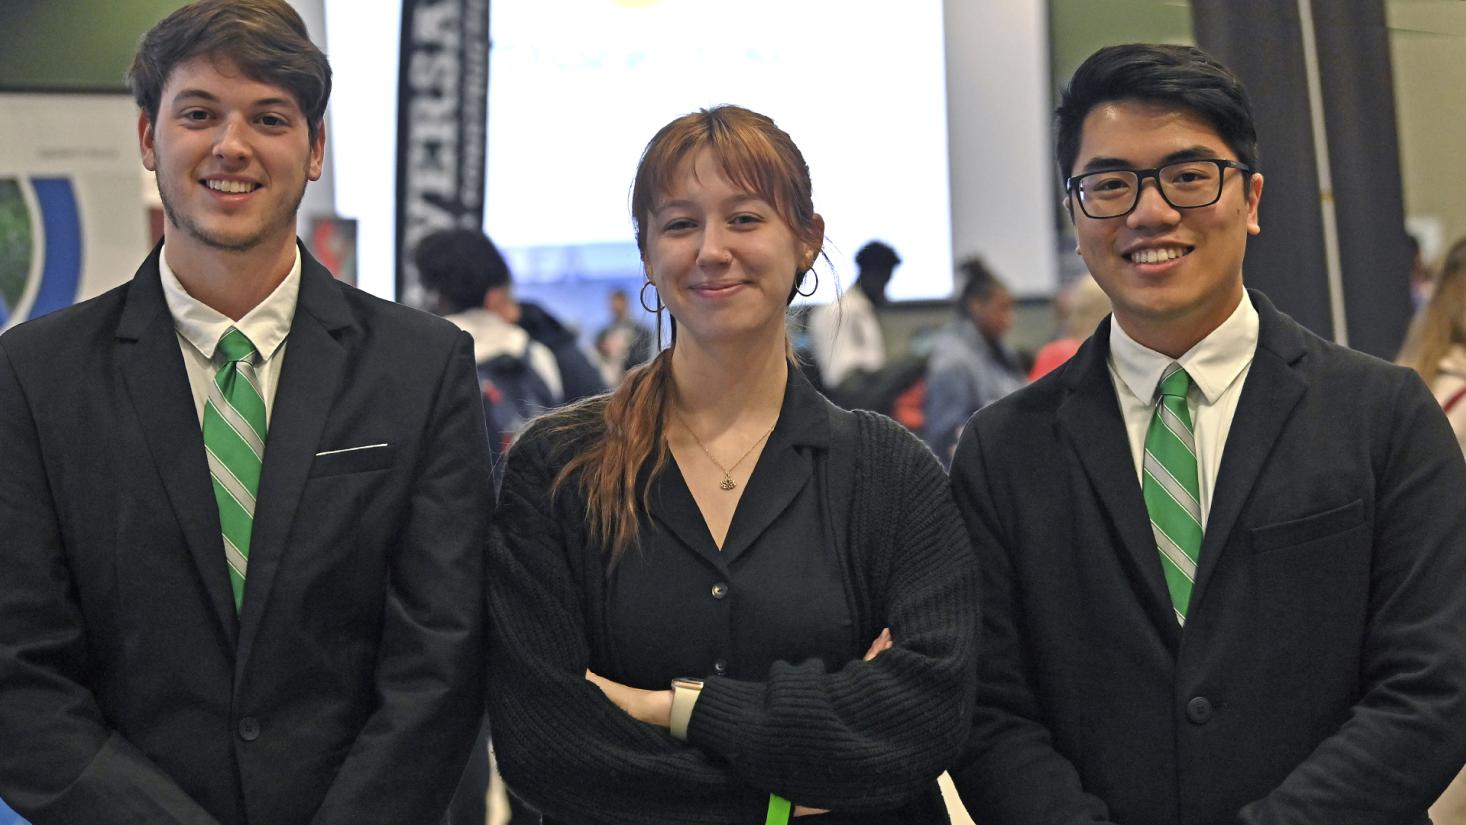 Three students in business suits